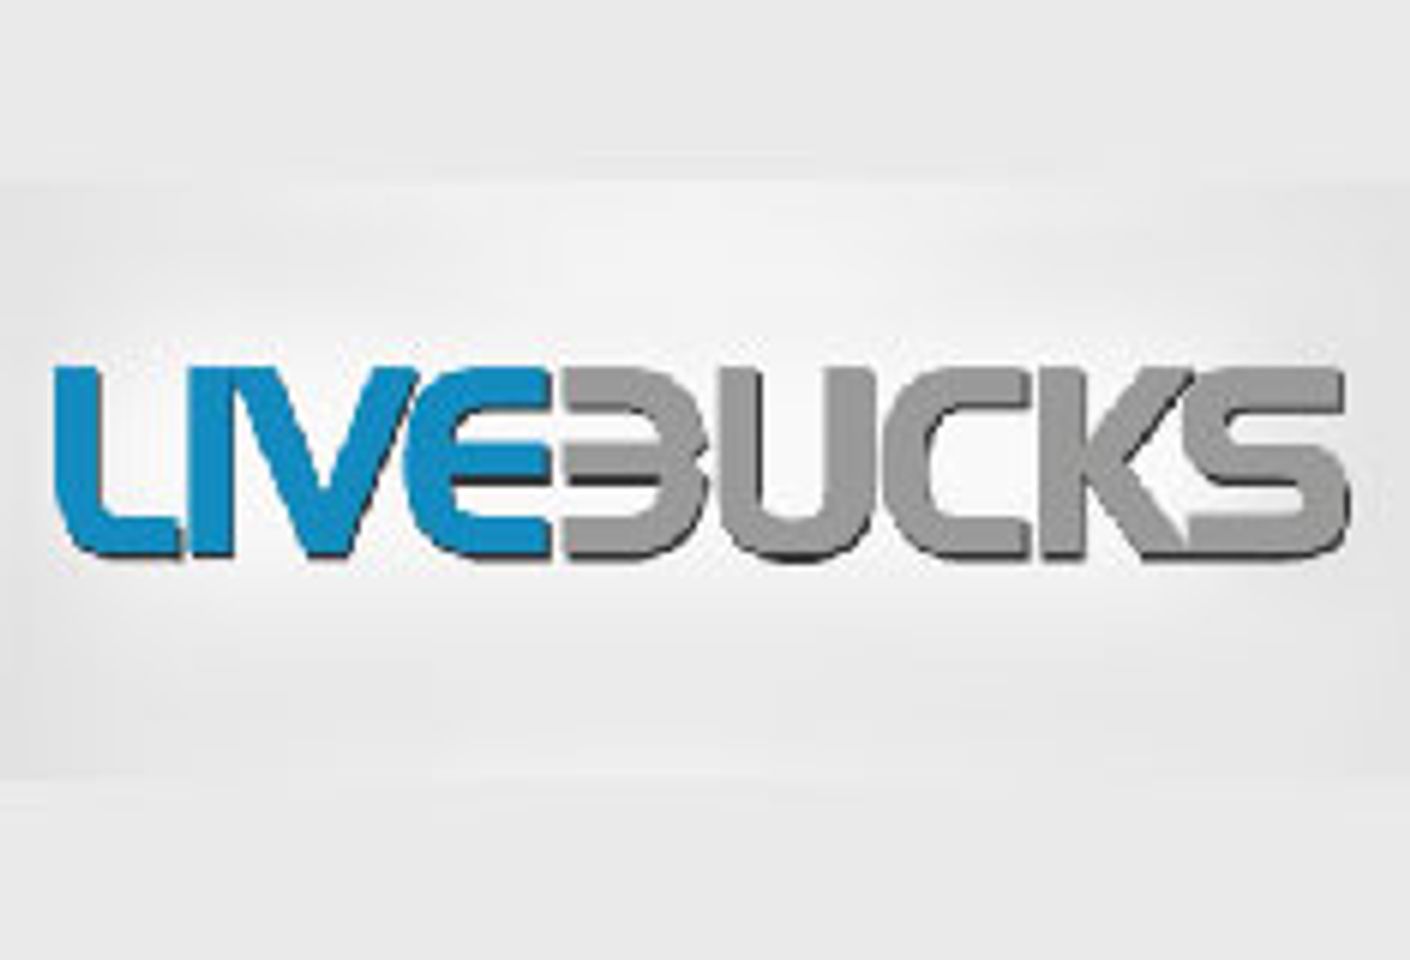 Live Bucks Extends $100 Per Join Promo on Camsters.com